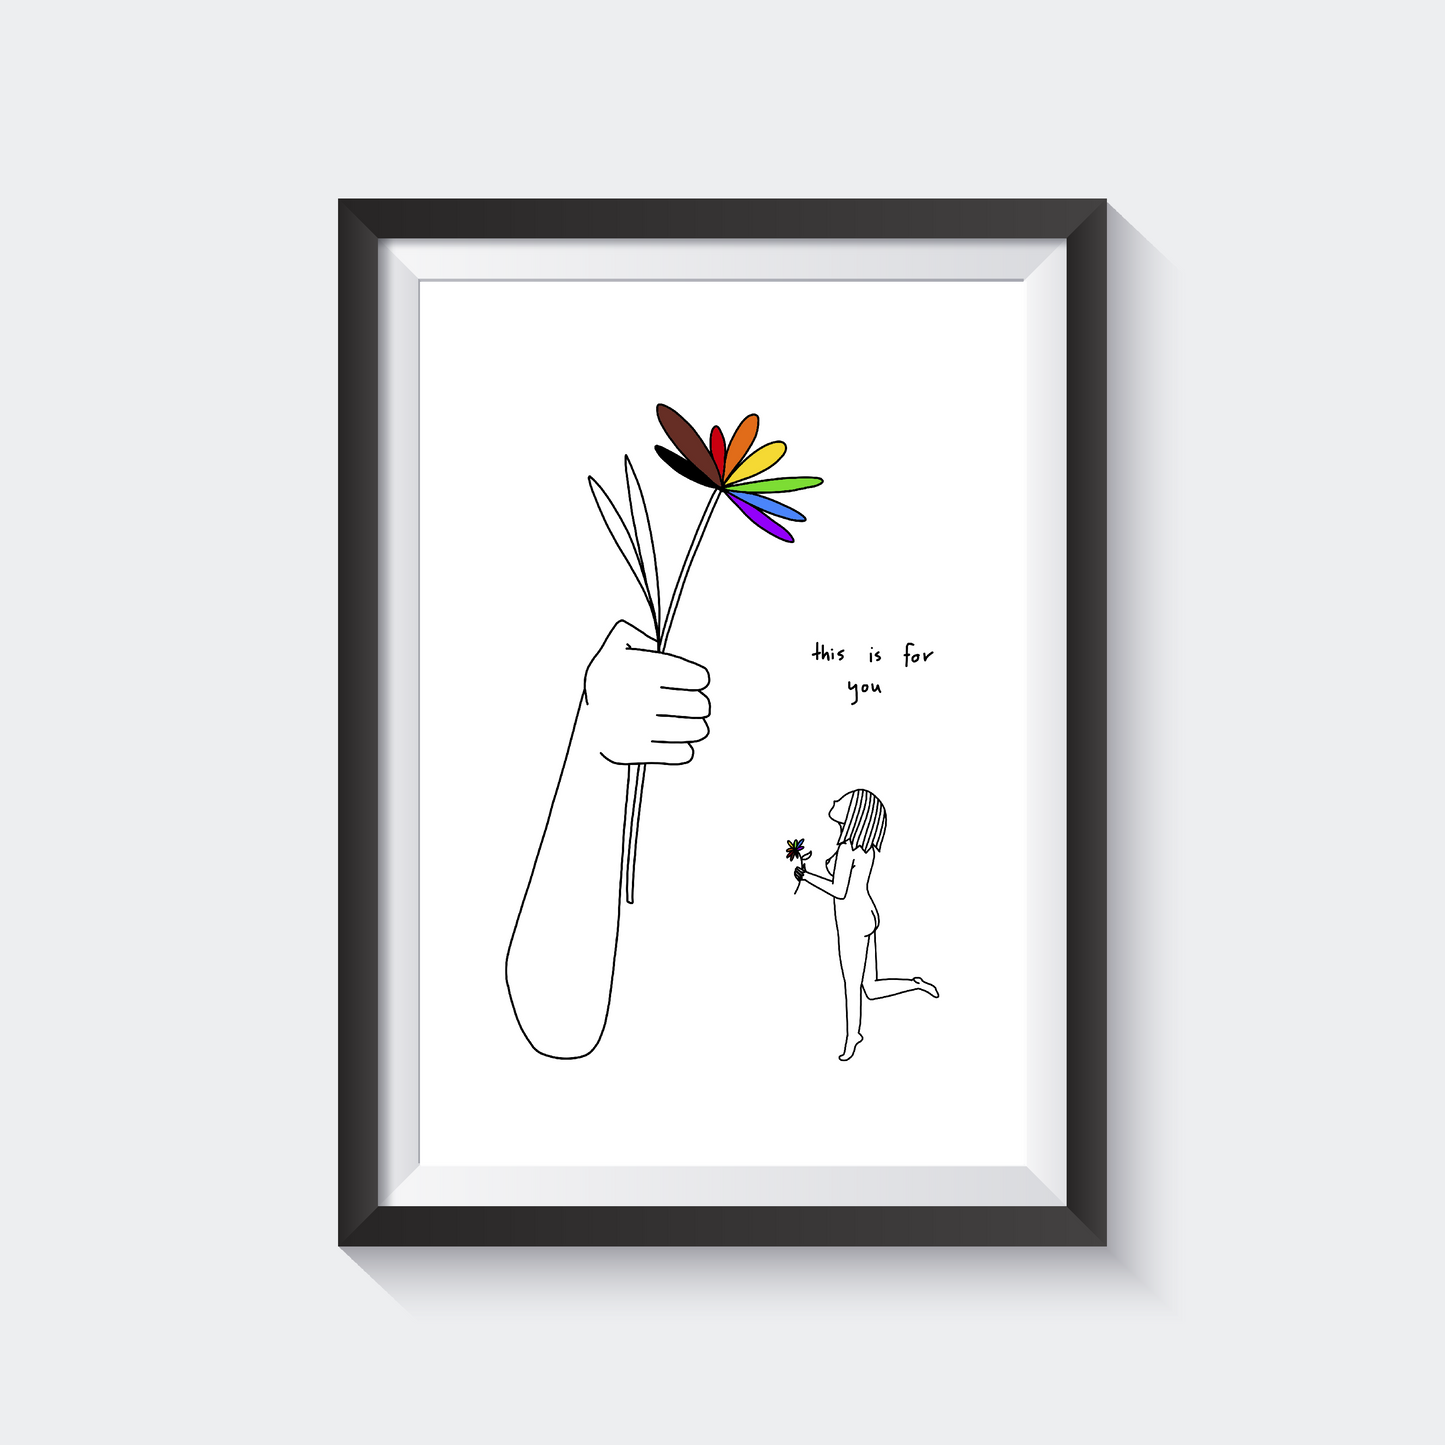 This is for you fine art print featuring two people giving each other a rainbow and people of colour flower 